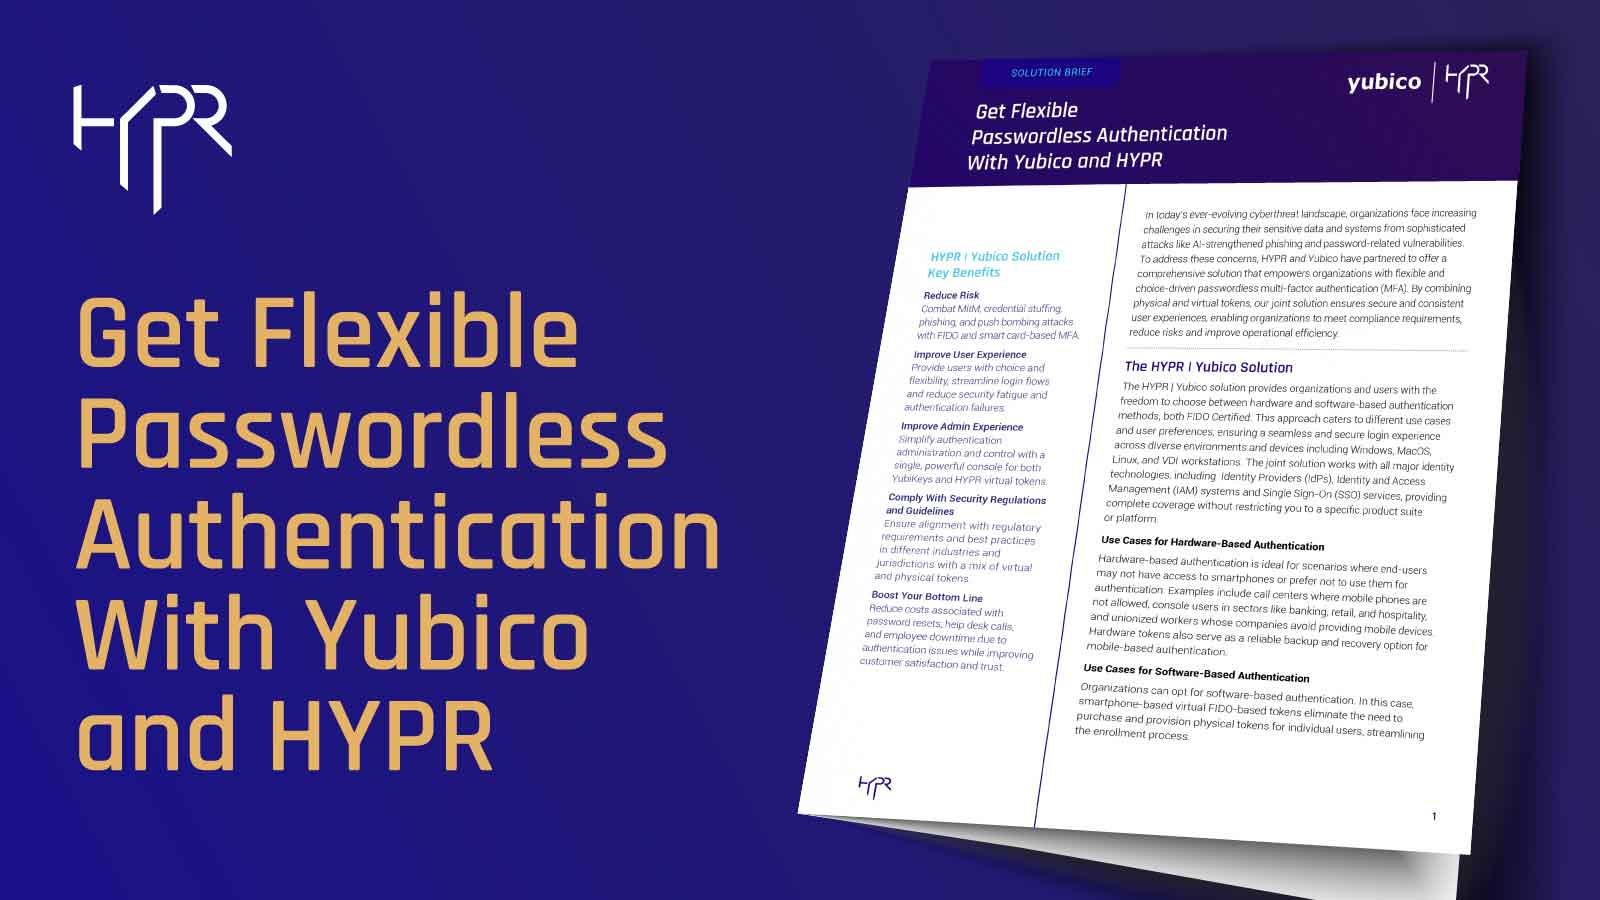 Yubico-HYPR Joint Solution